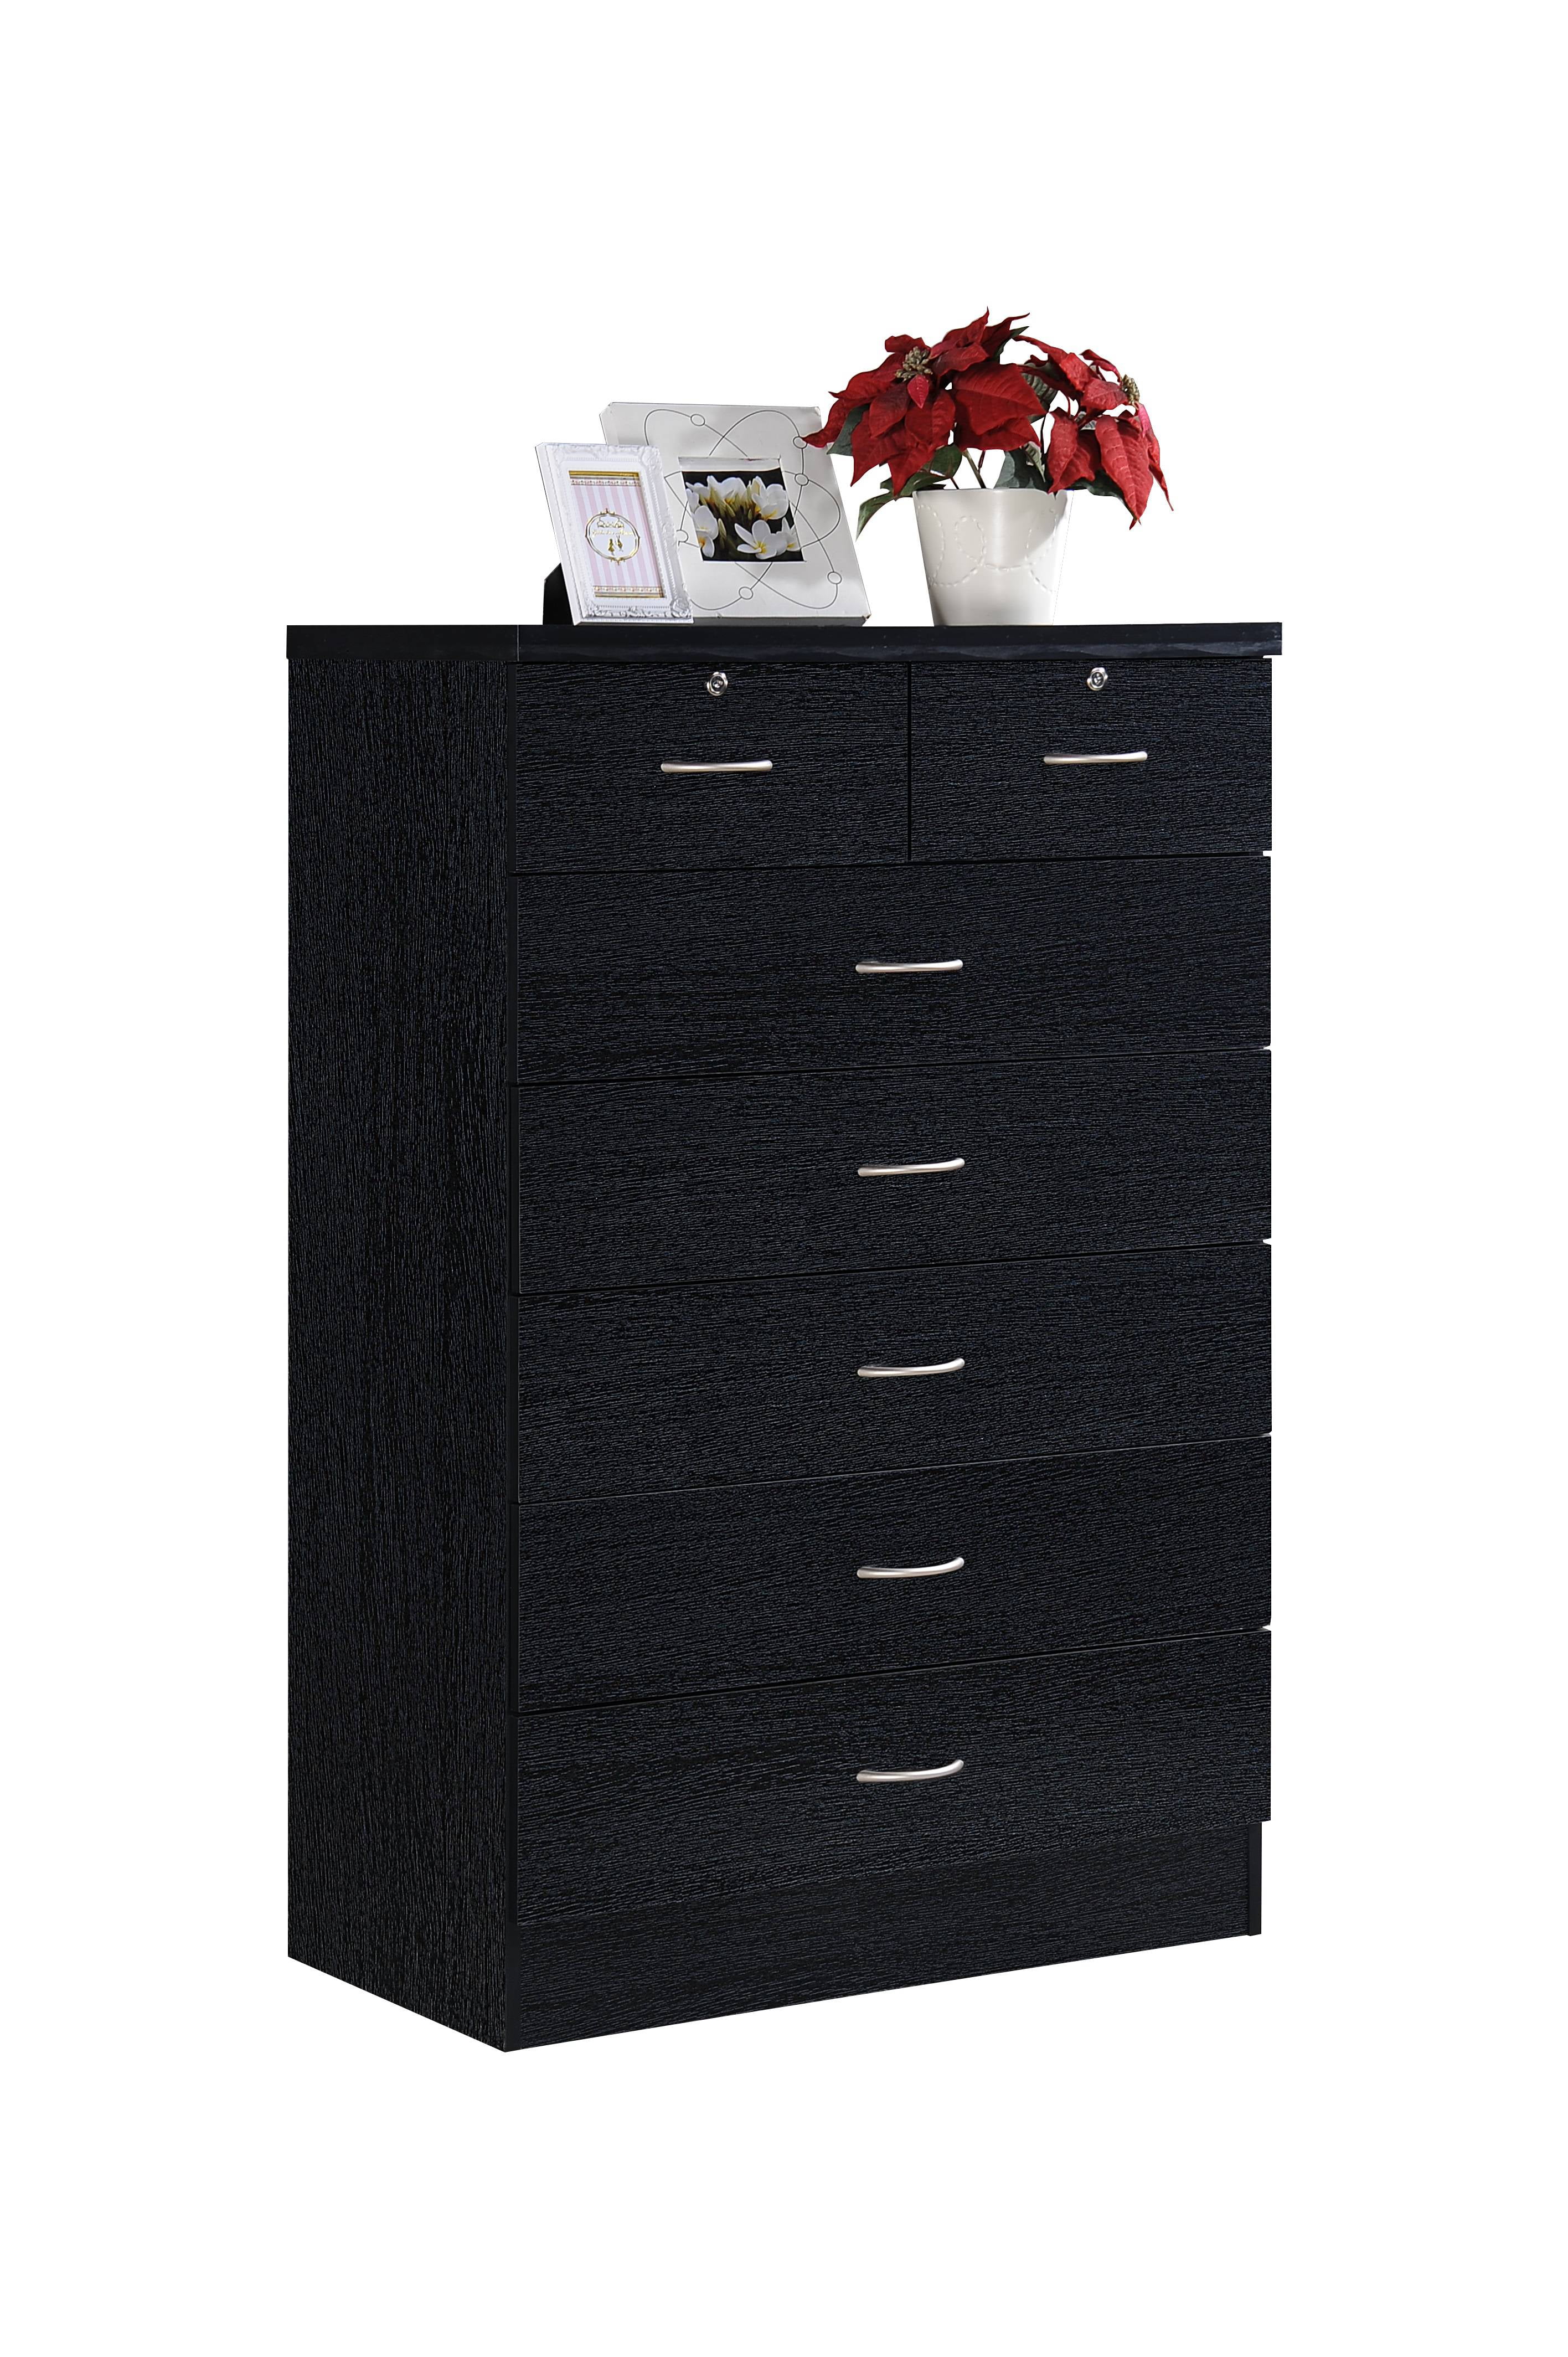 Mainstays DW65830 Classic 6 Drawer Dresser Dove Gray for sale online 